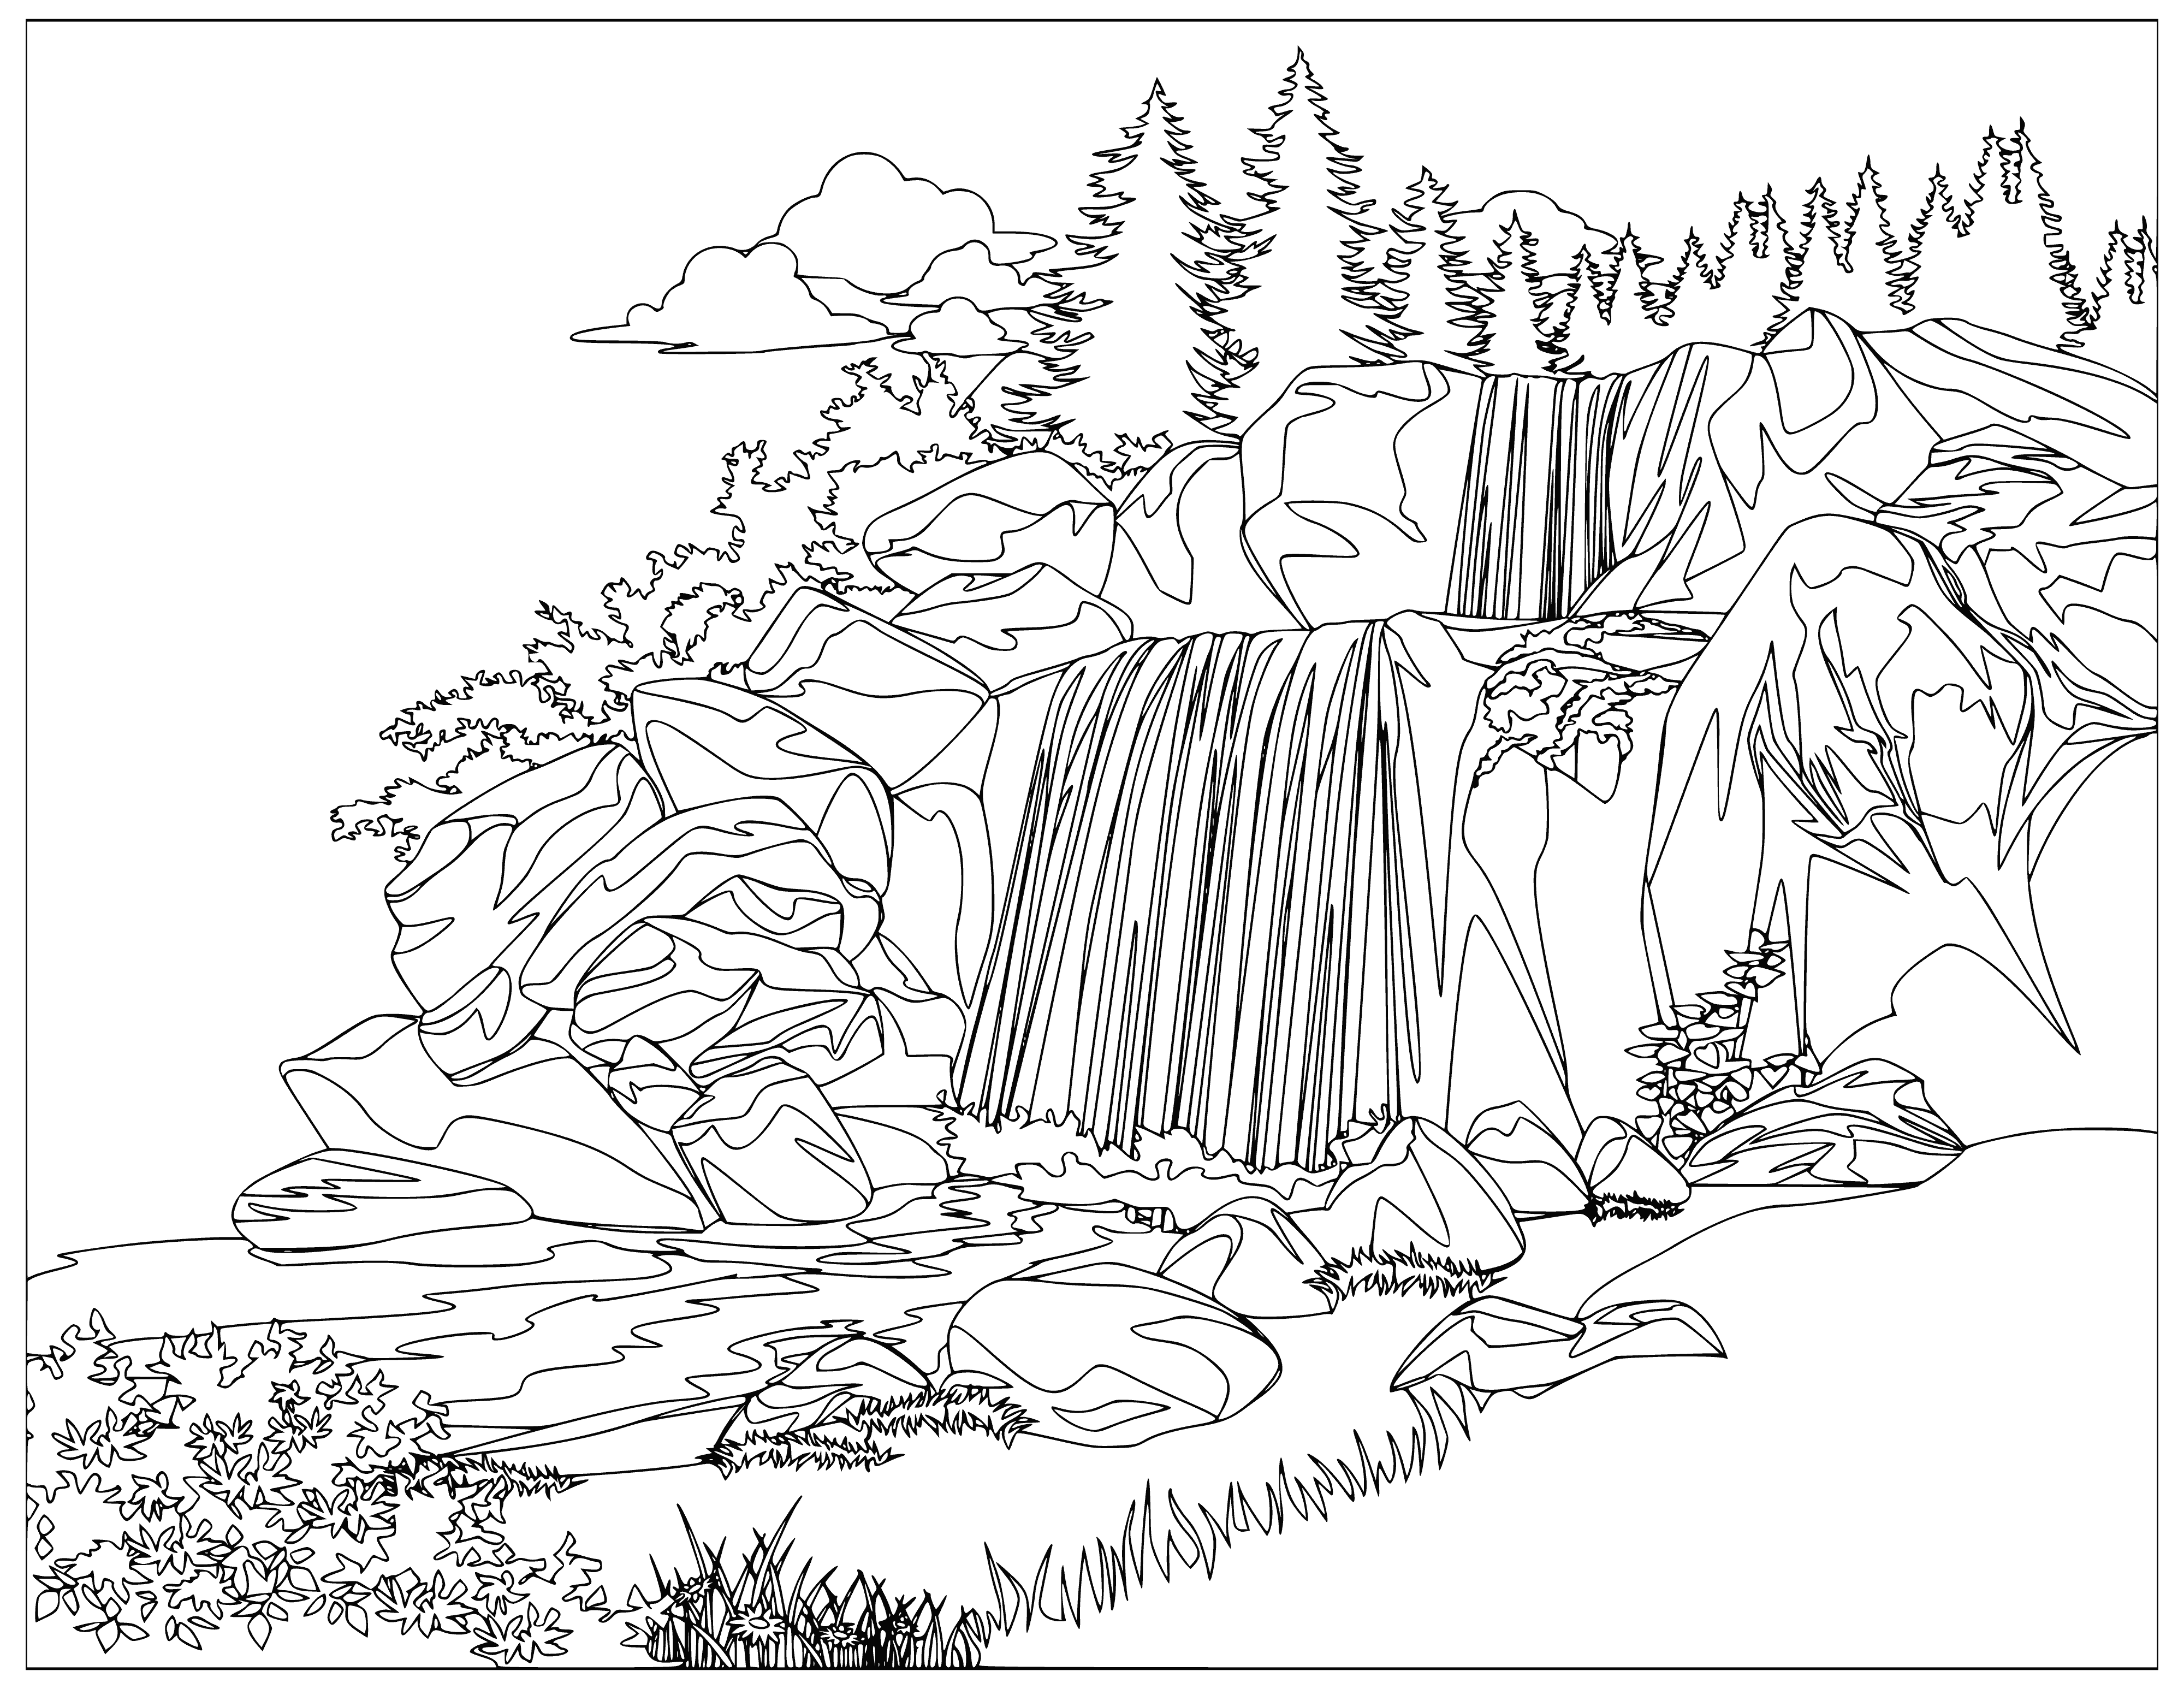 coloring page: Small mountain in background, river & trees in foreground, blue sky & white clouds - beautiful scenery! #nature #coloring pageperfect